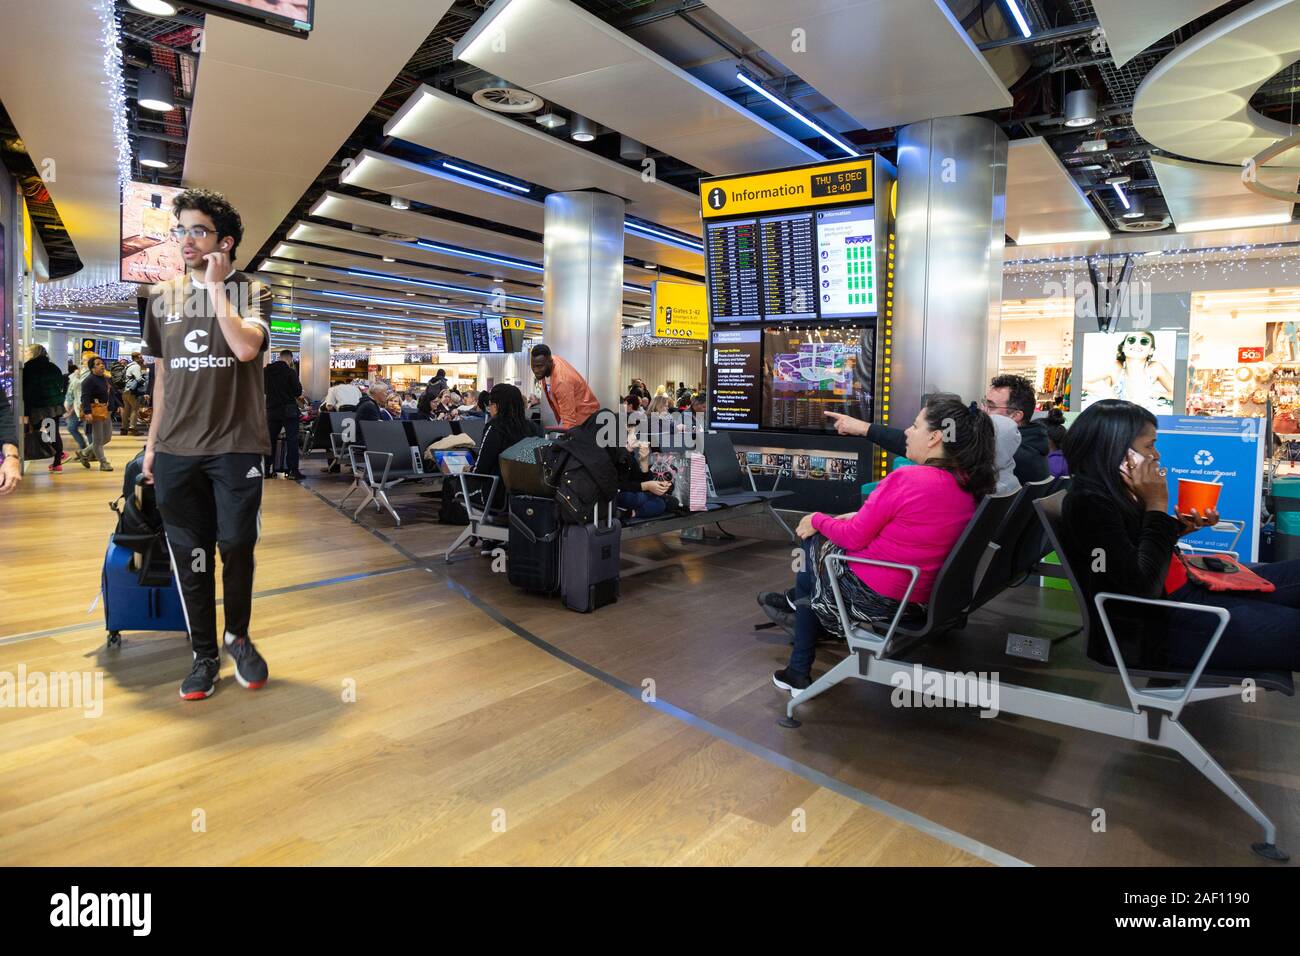 Heathrow Terminal 3 Interior People In The Departure Lounge